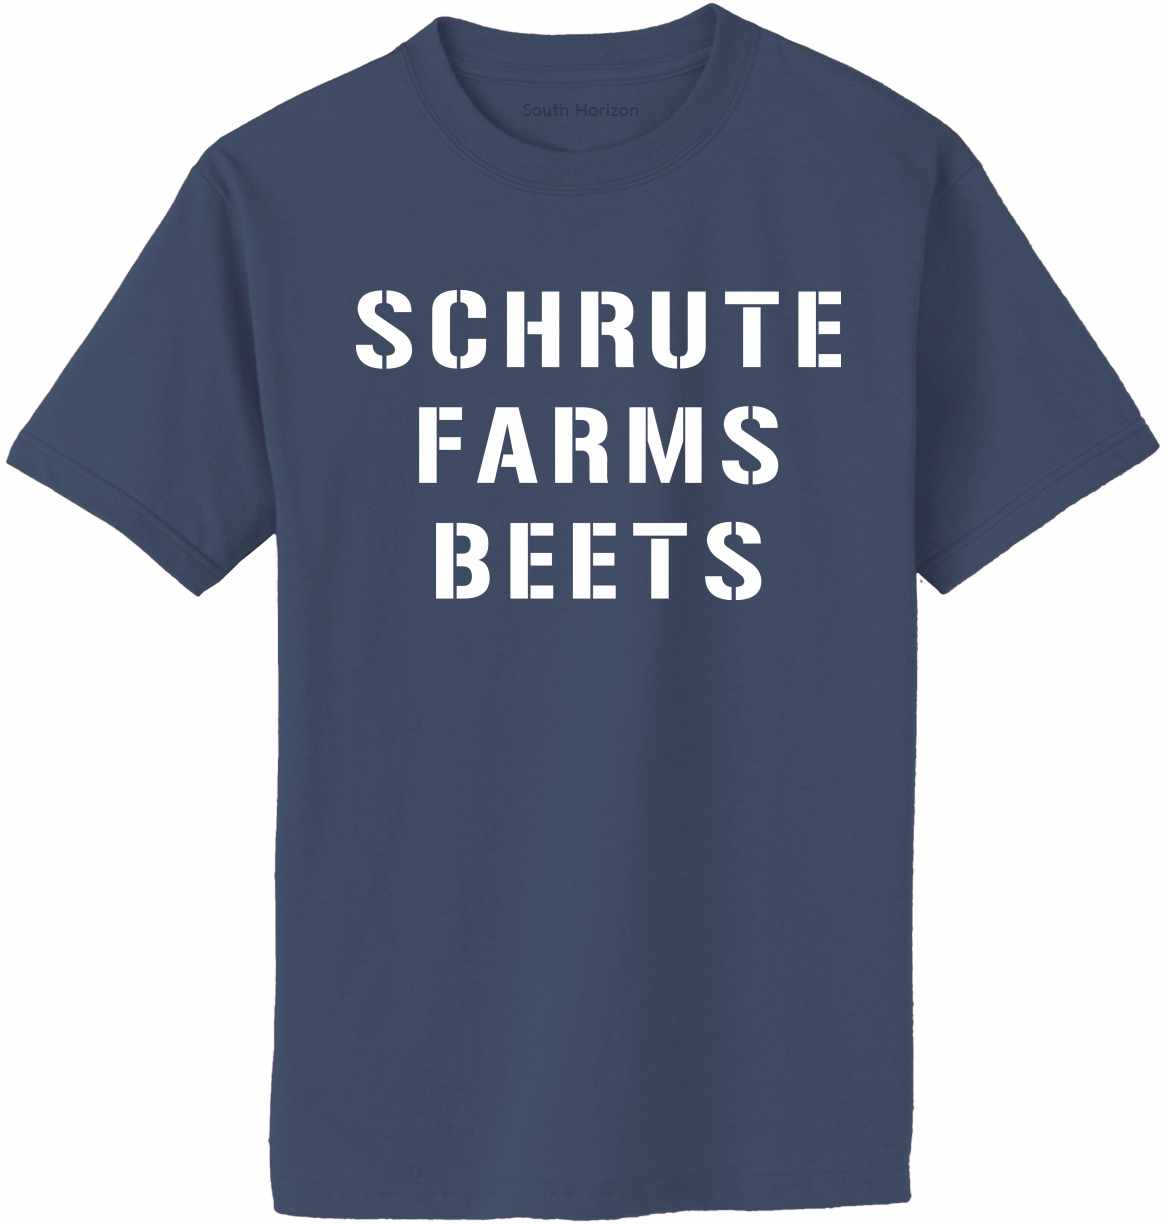 SCHRUTE FARMS BEETS Adult T-Shirt (#396-1)